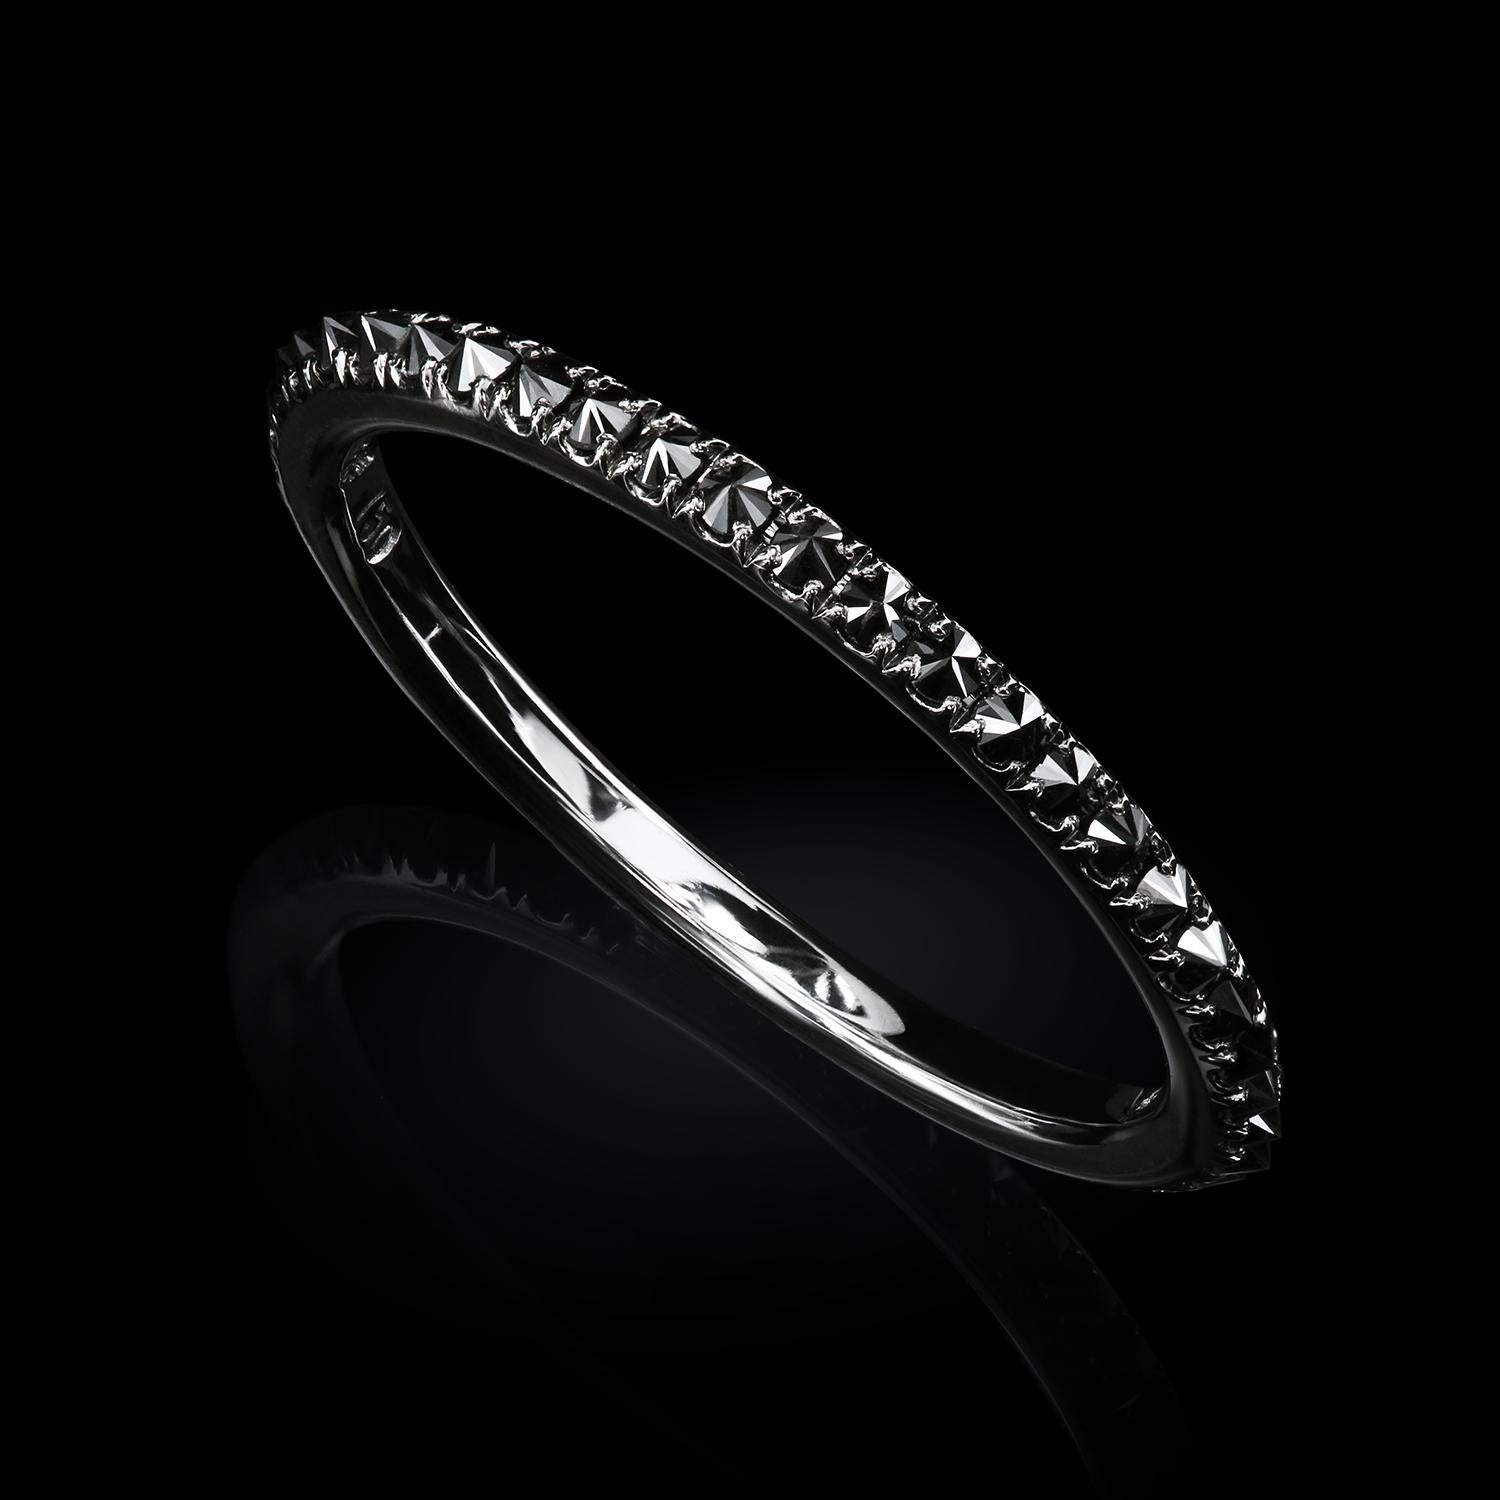 The cool futuristic band designed for visionaries who detest ordinary can be mistaken for an alien spaceship spare part at first. The 18K black gold band holds natural black diamonds set upside-down for dramatic effect.

1.70 mm in width
18K white